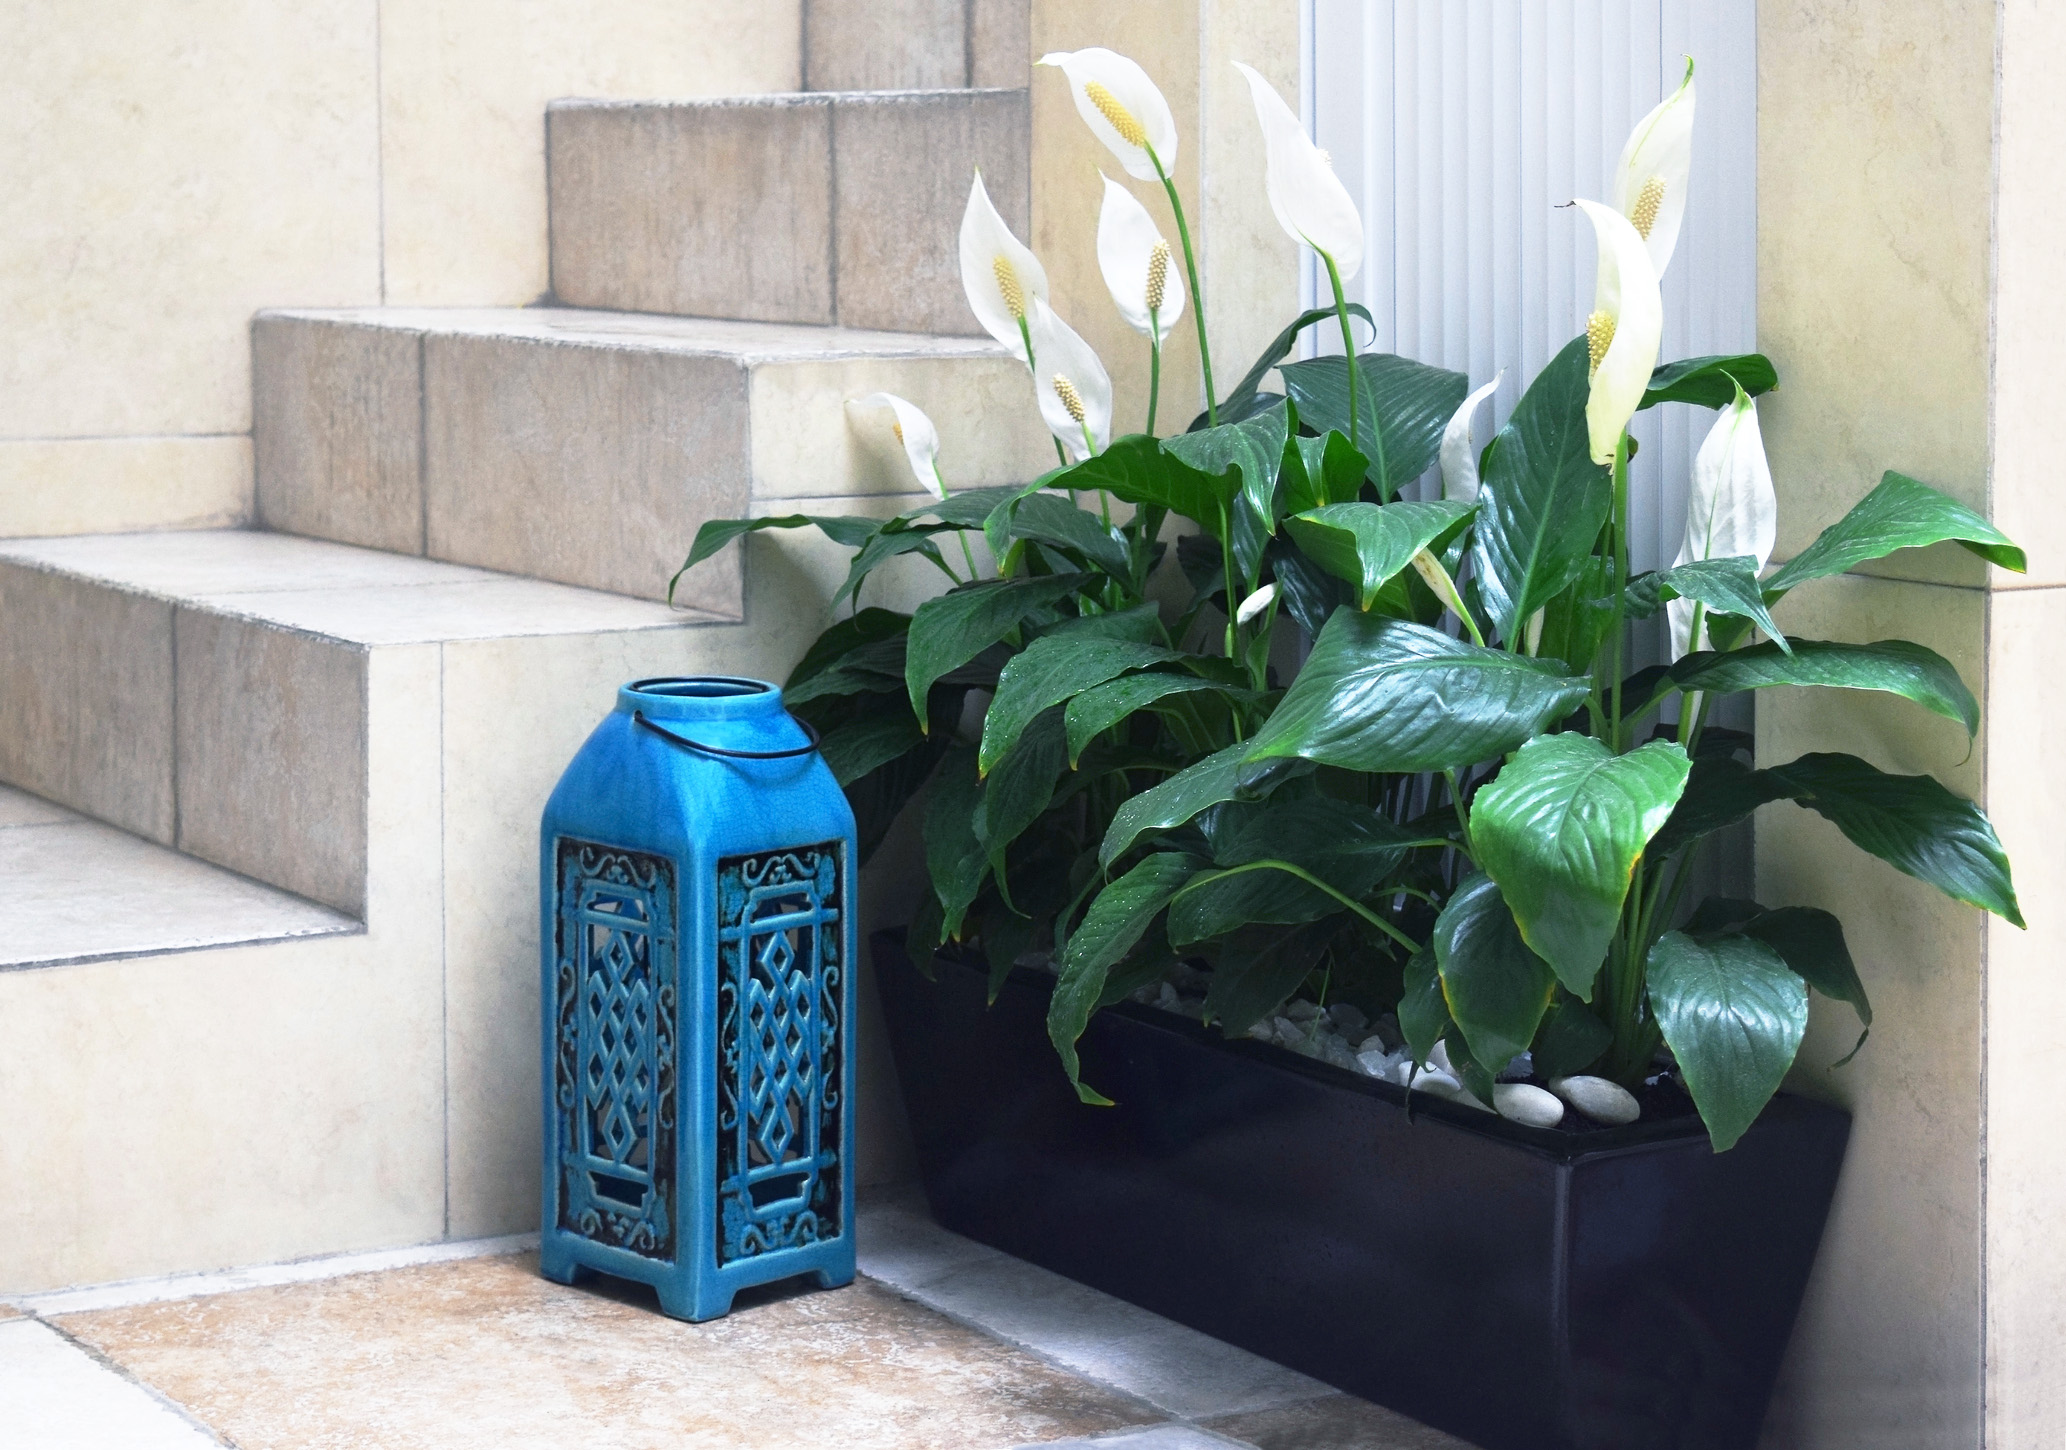 Peace Lily Growing In Pot By Blue Lantern